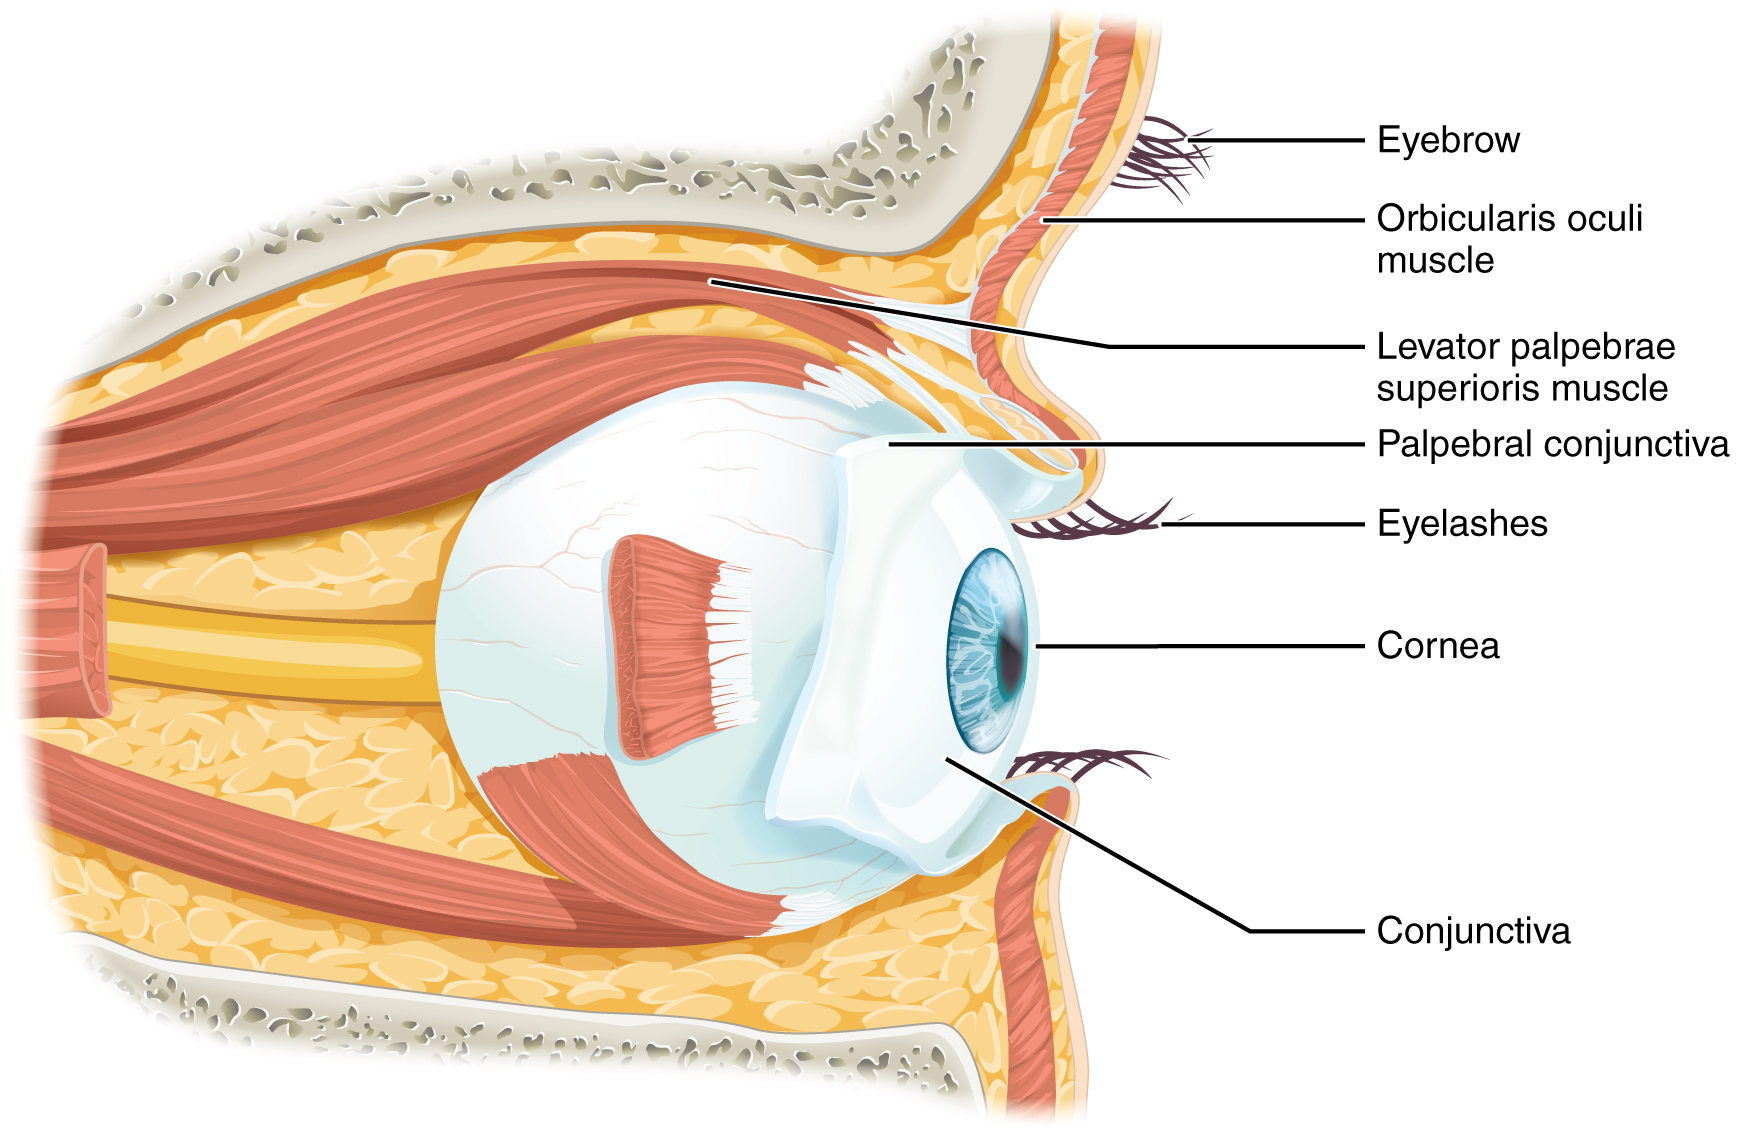 This diagram shows the lateral view of the eye. The major parts are labeled.